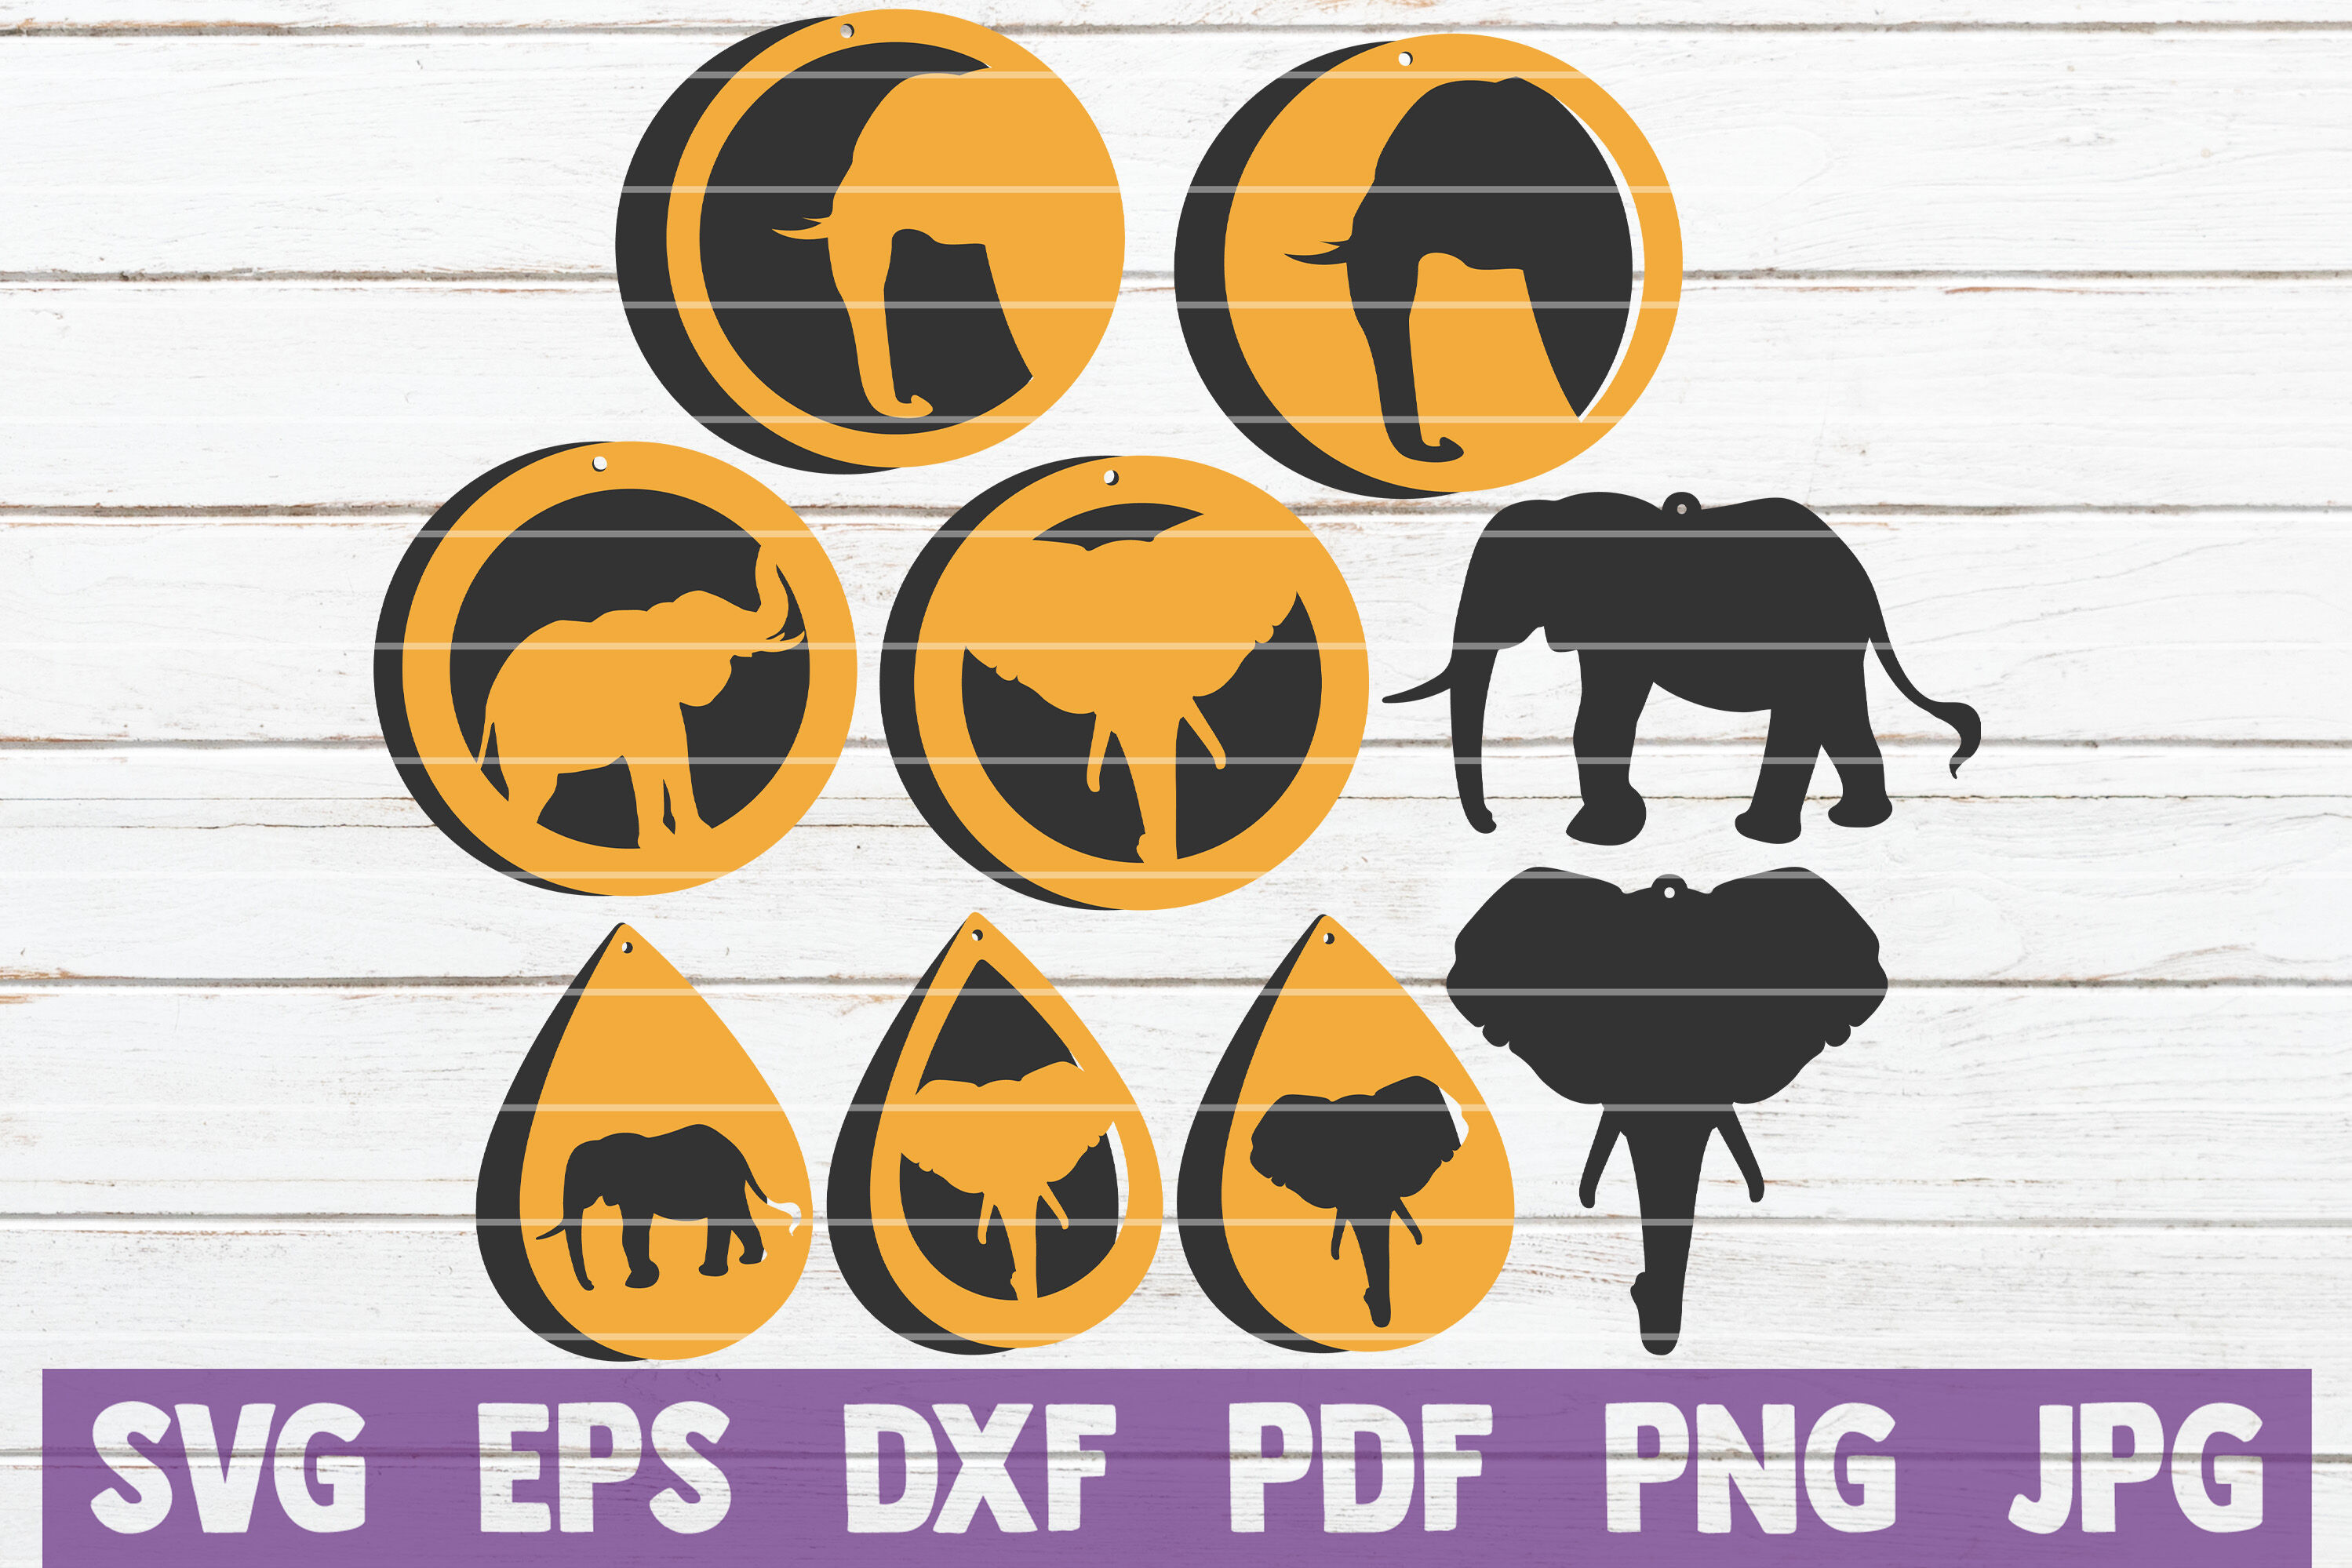 Download Elephant Earrings SVG Cut File Templates By MintyMarshmallows | TheHungryJPEG.com